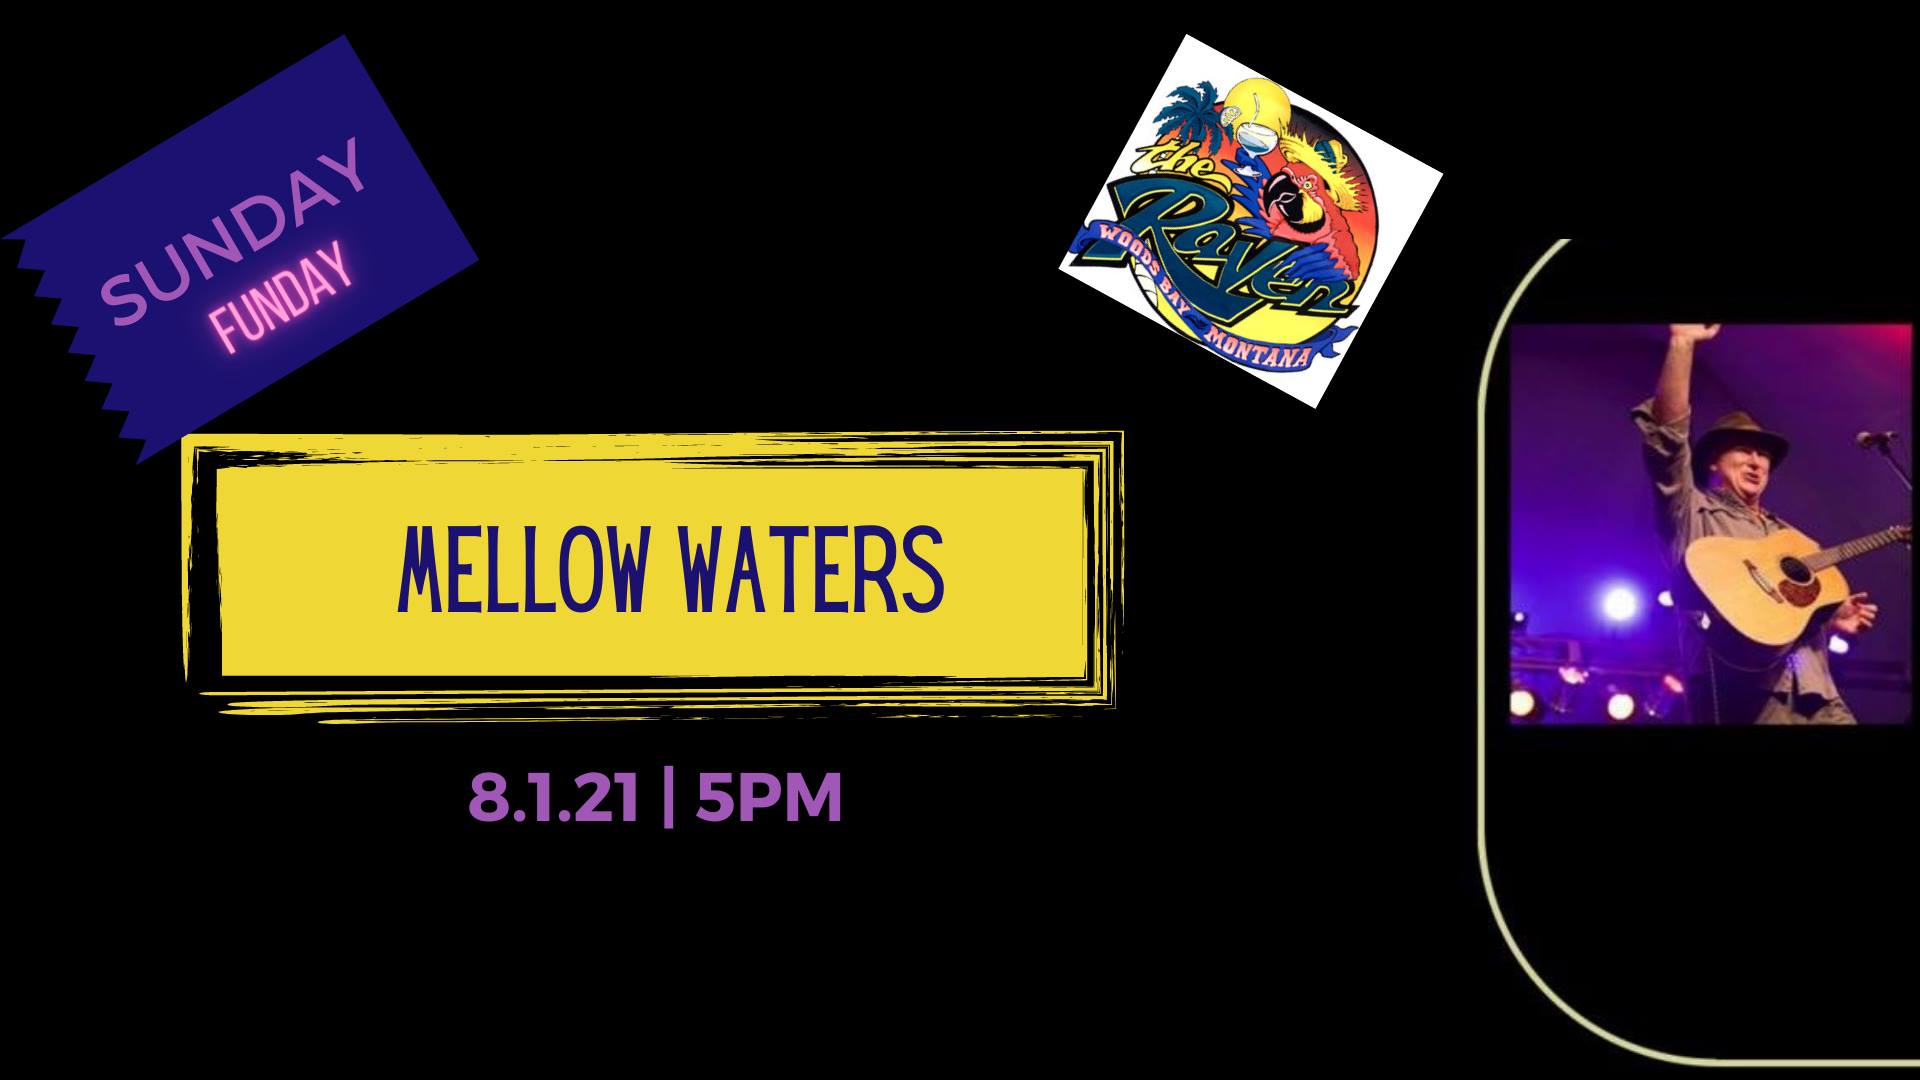 Sunday Funday with Mellow Waters